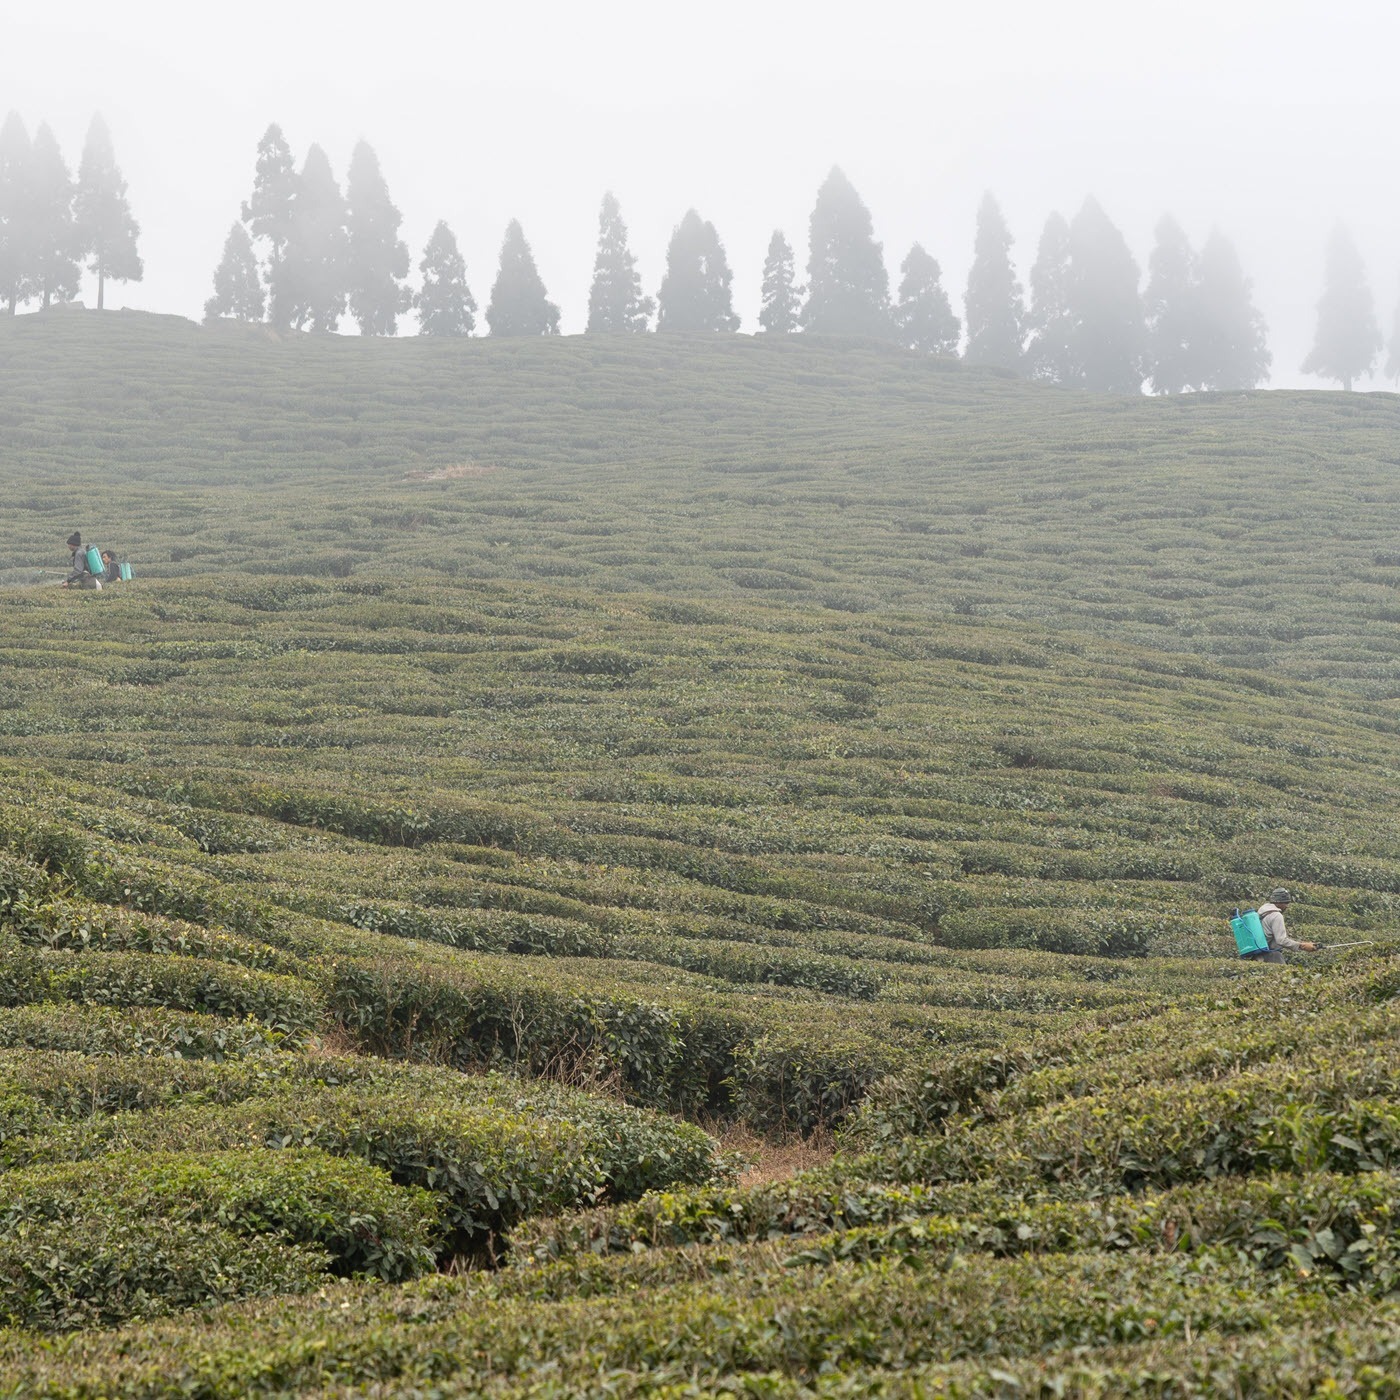 India Tea News |  Bought Leaf Factories Blame India Tea Board For Non-Support of Food Safety Compliance Requirements | Weather Impacts Tea Crop in Assam’s Barak Valley |